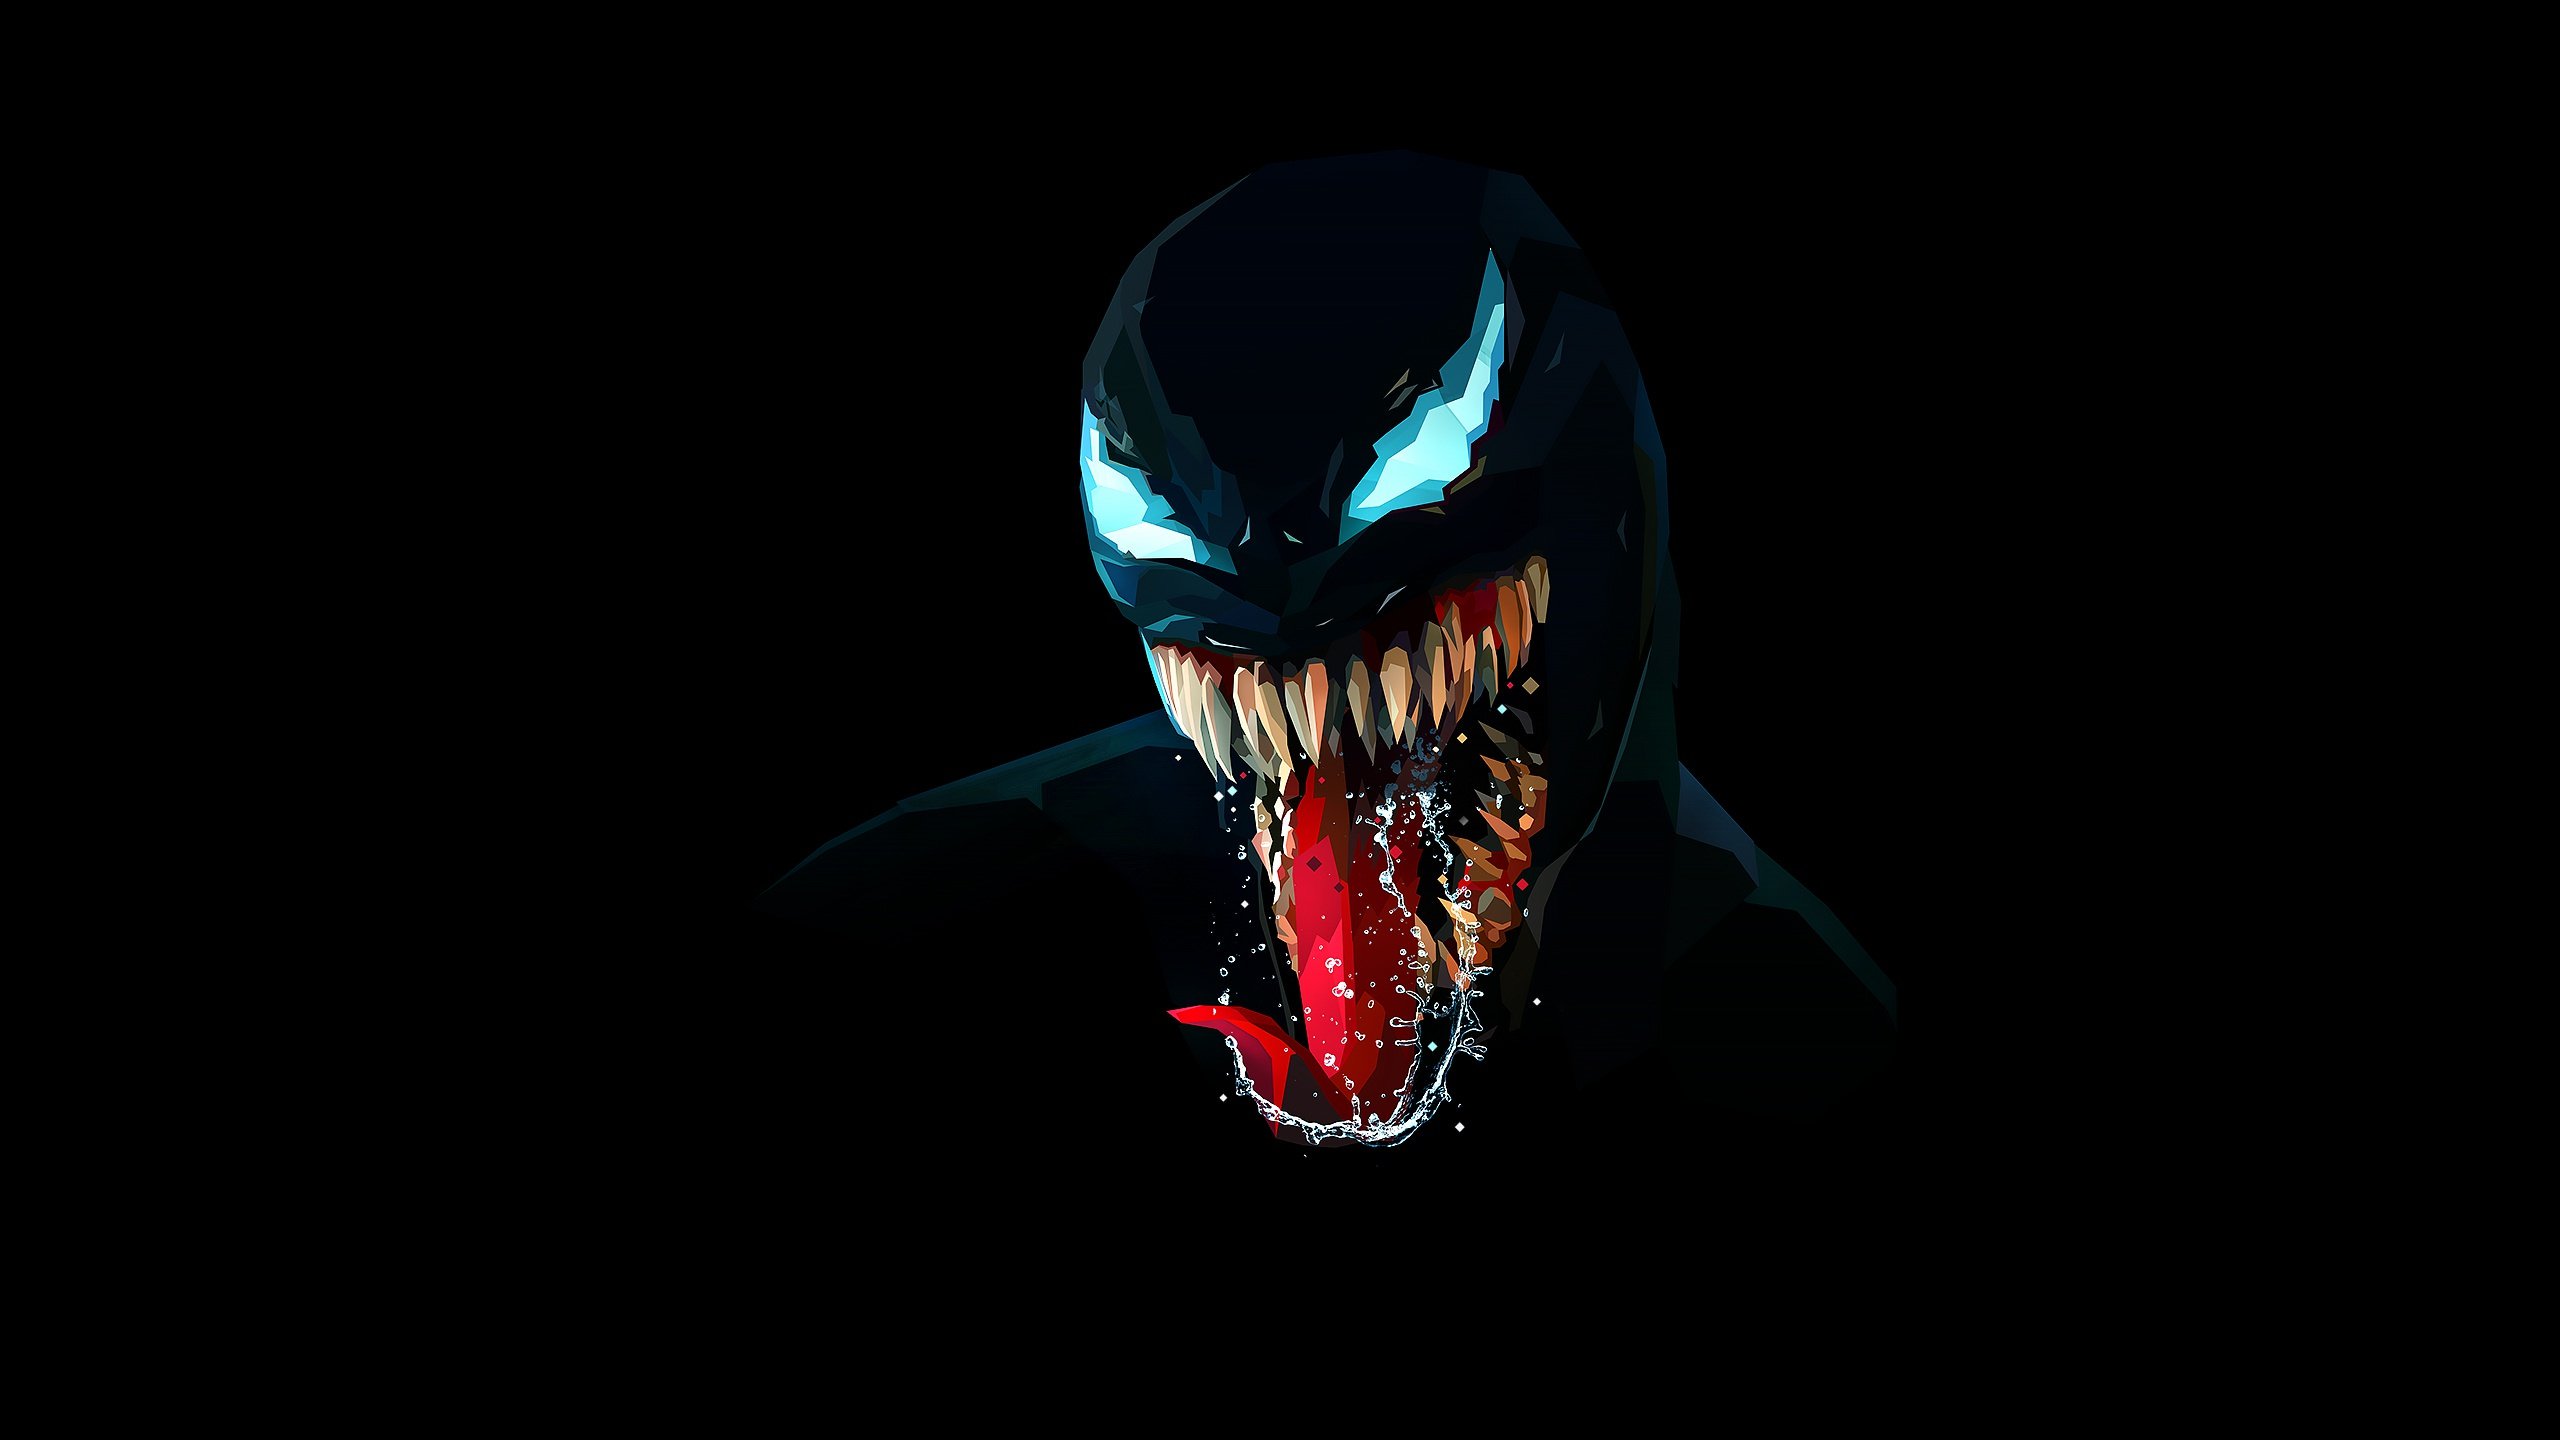 Venom 4K wallpapers for your desktop or mobile screen free and easy to ...